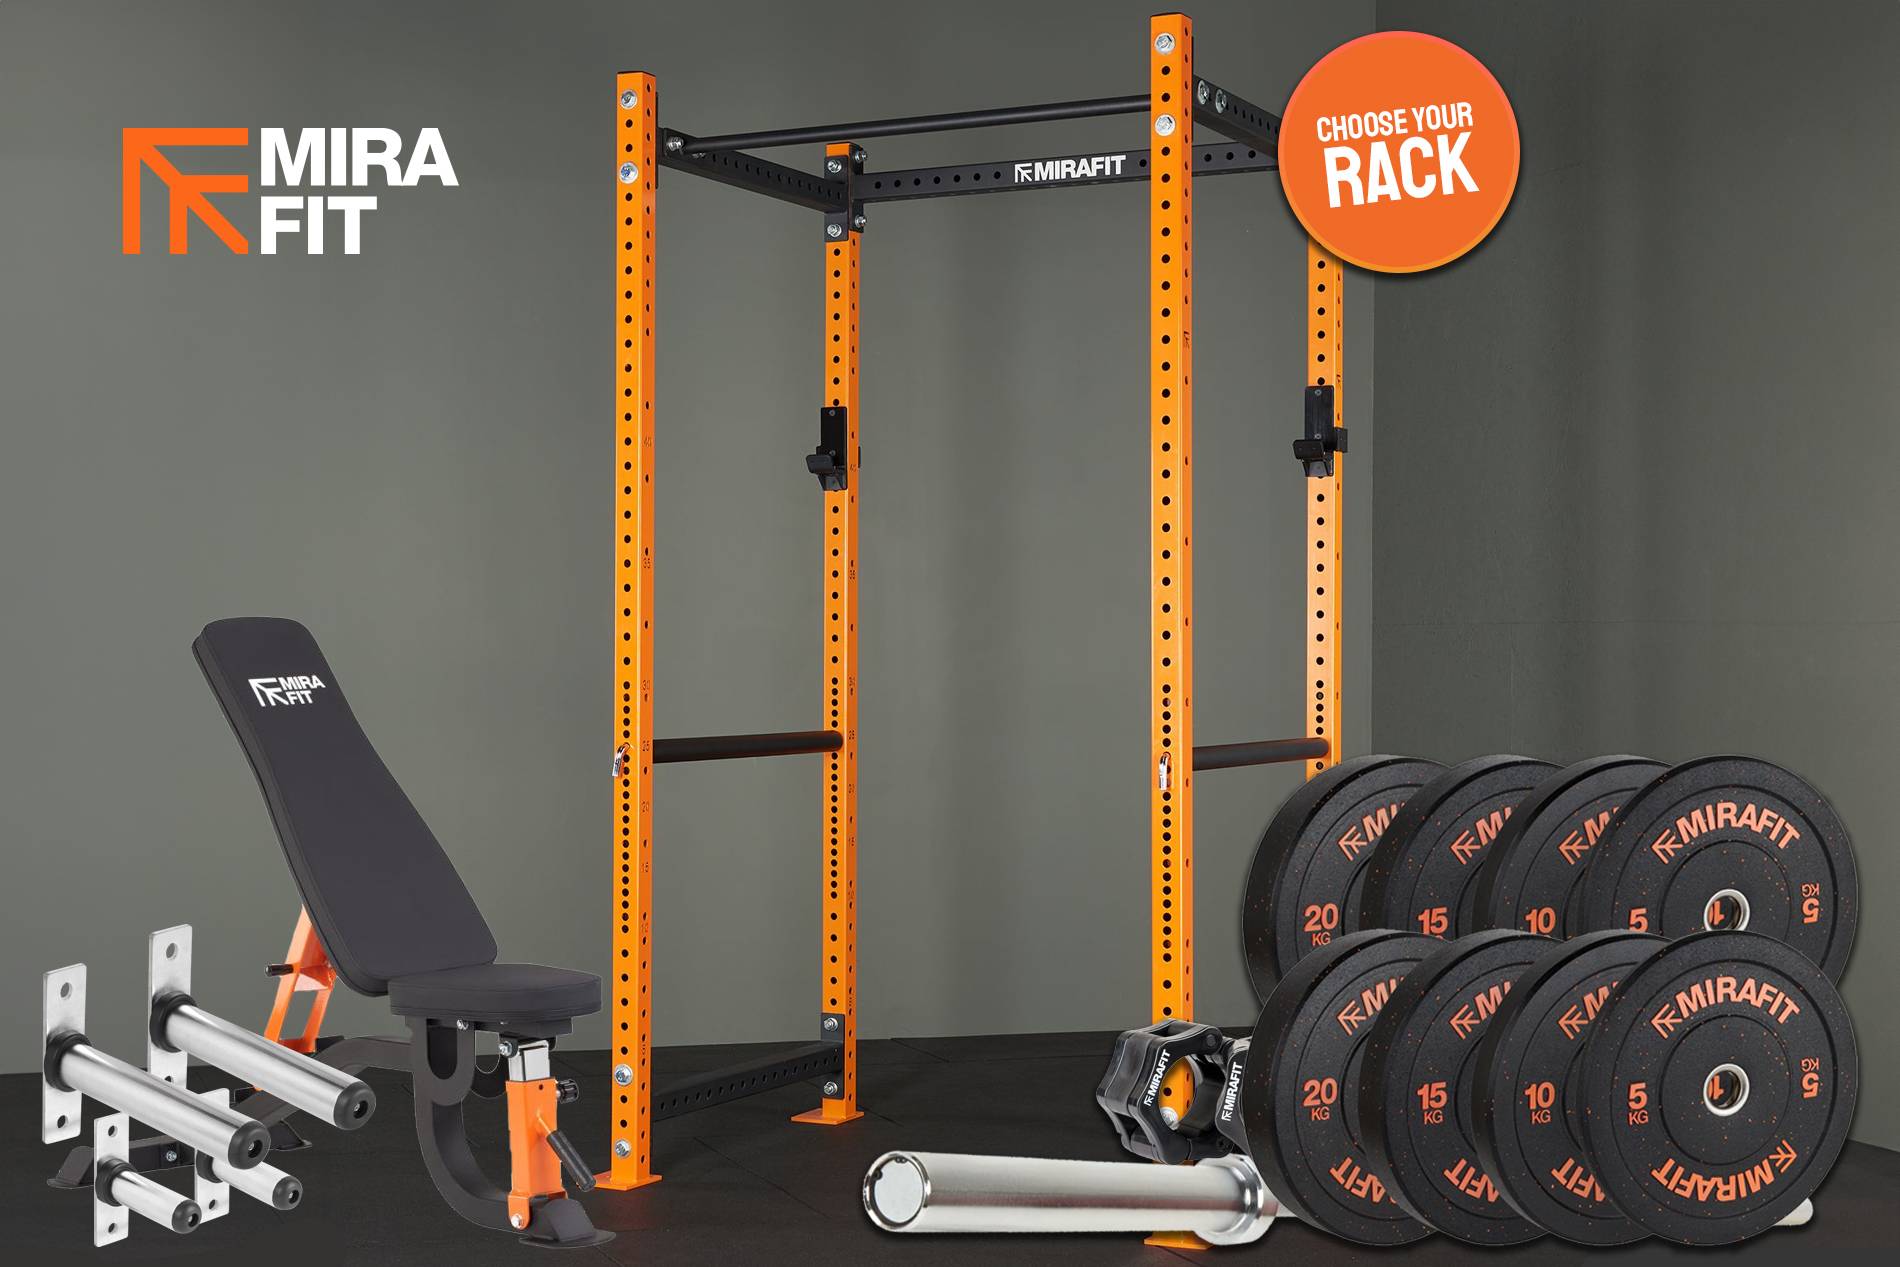 Win this Ultimate Mirafit Home Gym Package - Only 999 Entries